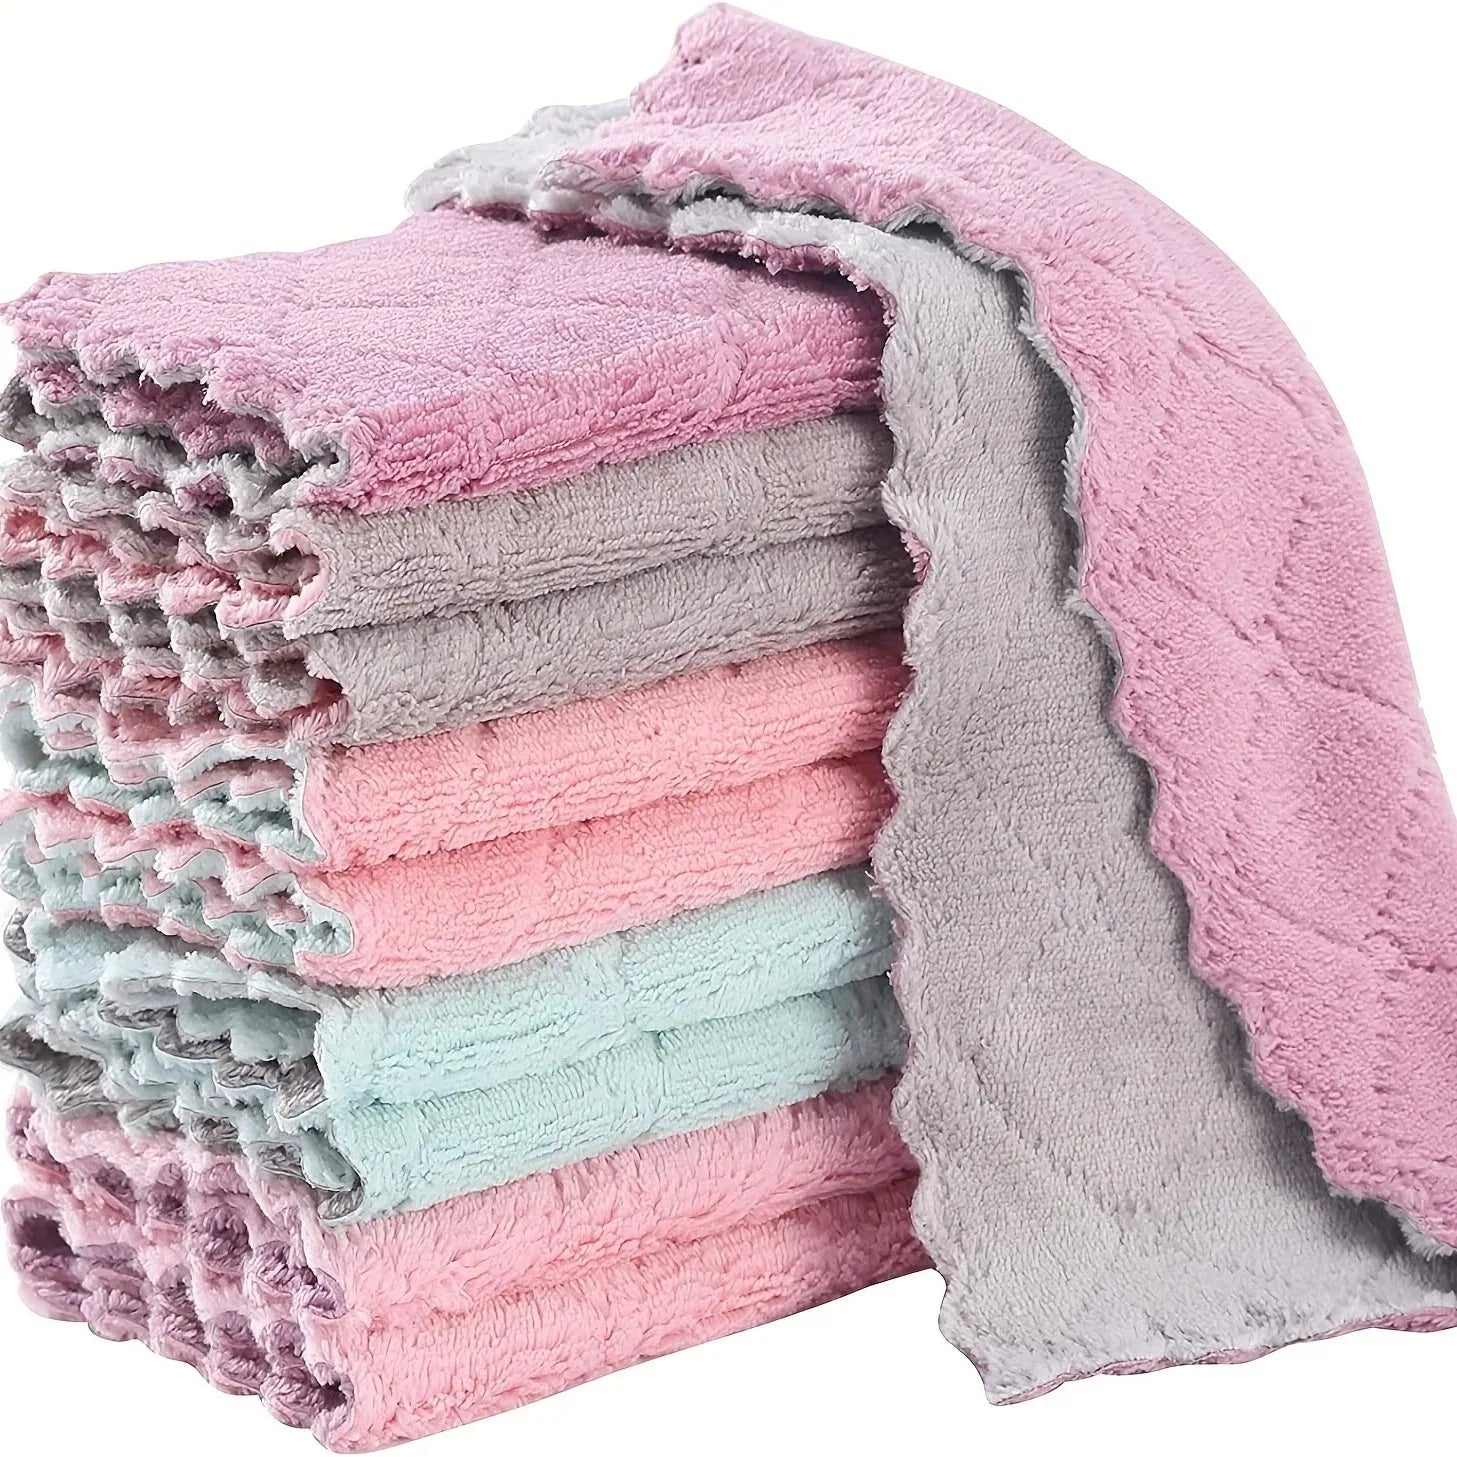 10/20pcs Kitchen Towels And Dishcloths Rag Set Small Dish Towels For Washing Dishes Dish Rags For Cooking Baking-Random Color